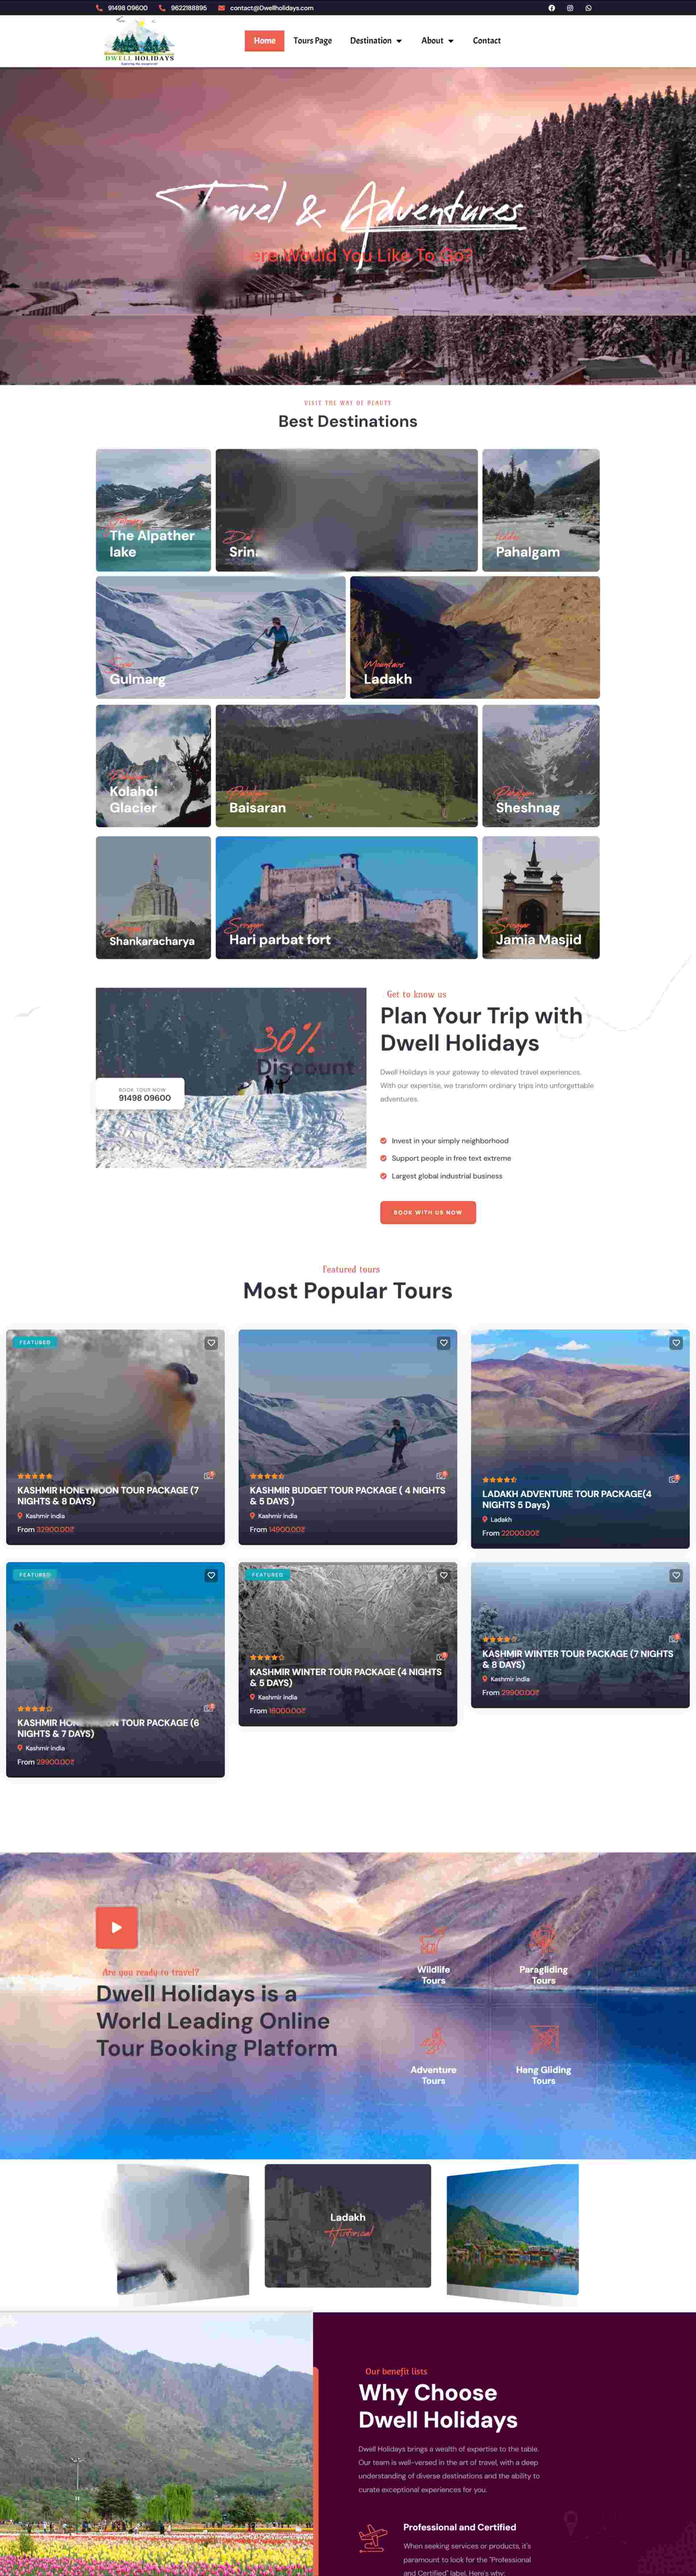 Dwell Holidays Tour Package website developed & Hosted on Elyspace